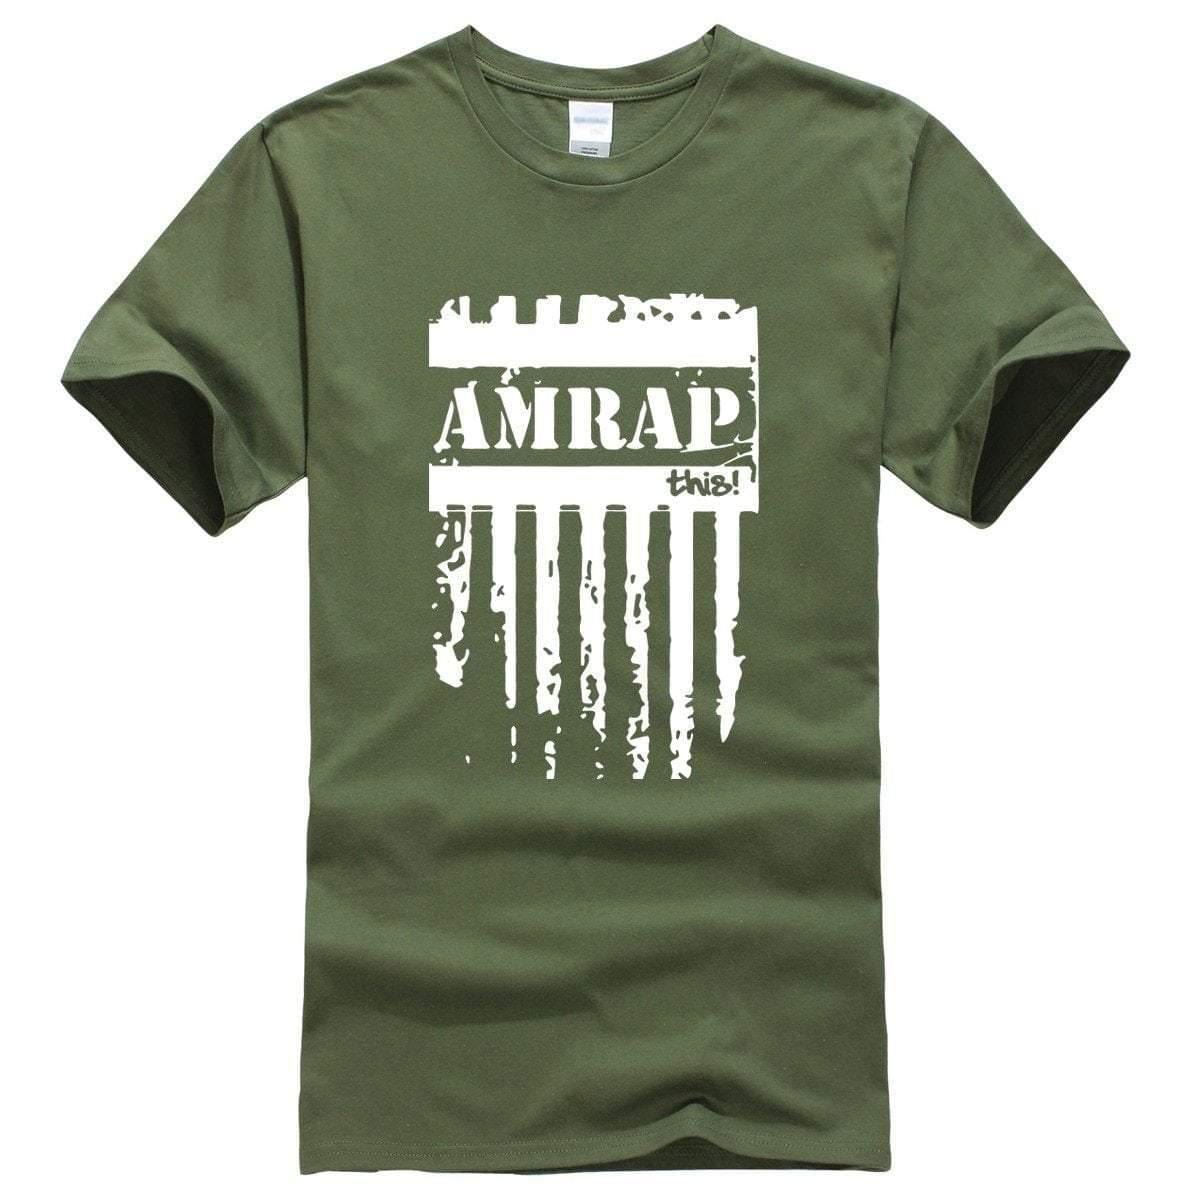 As many reps as possible CrossFit T-shirt